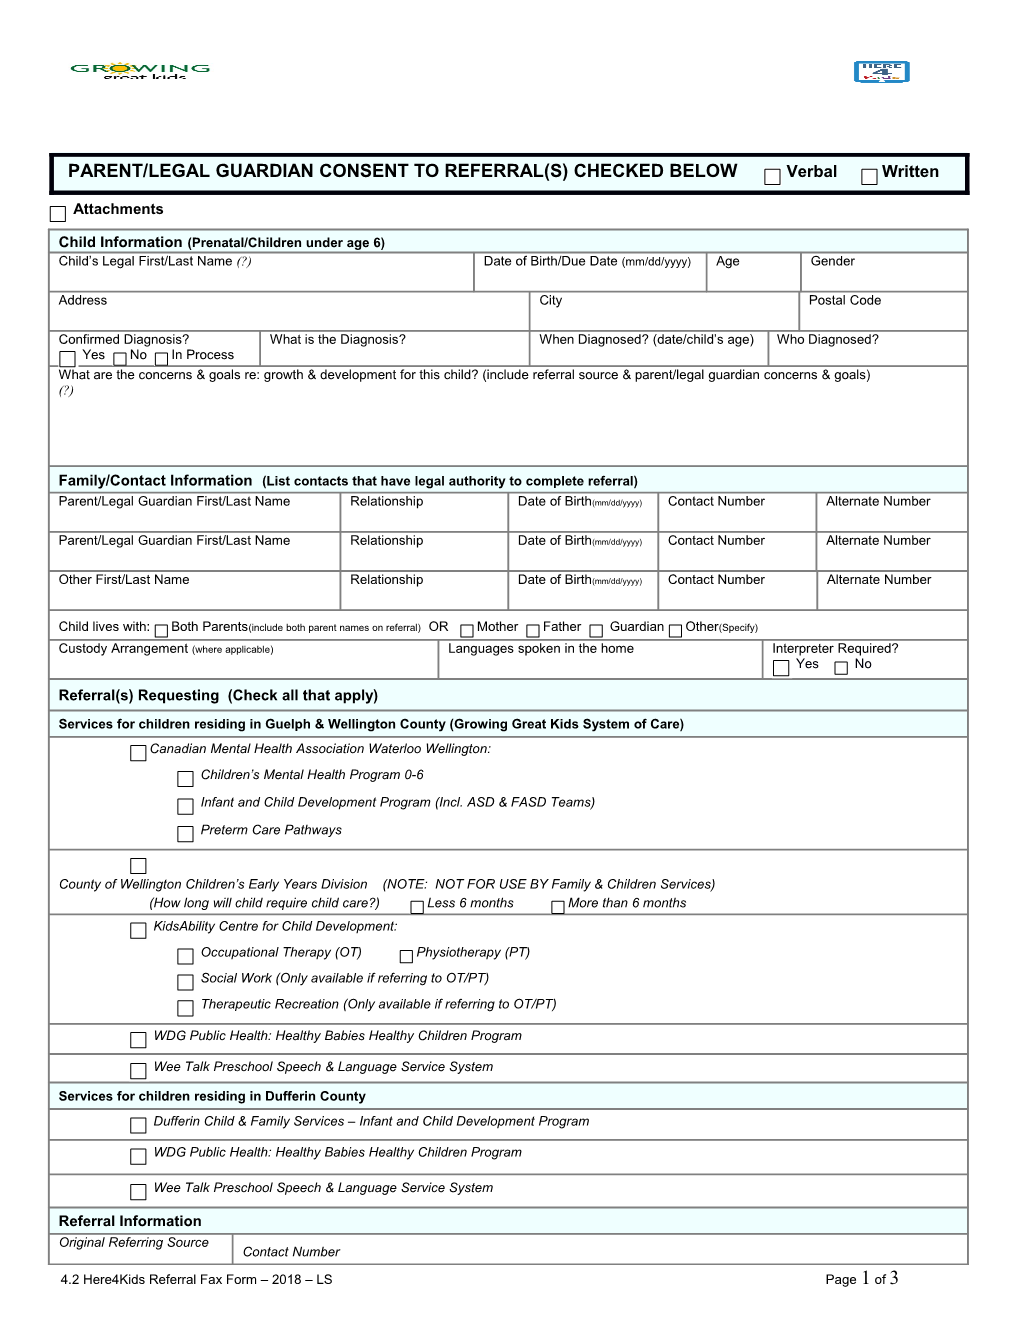 Referral Fax Form: Completion Key